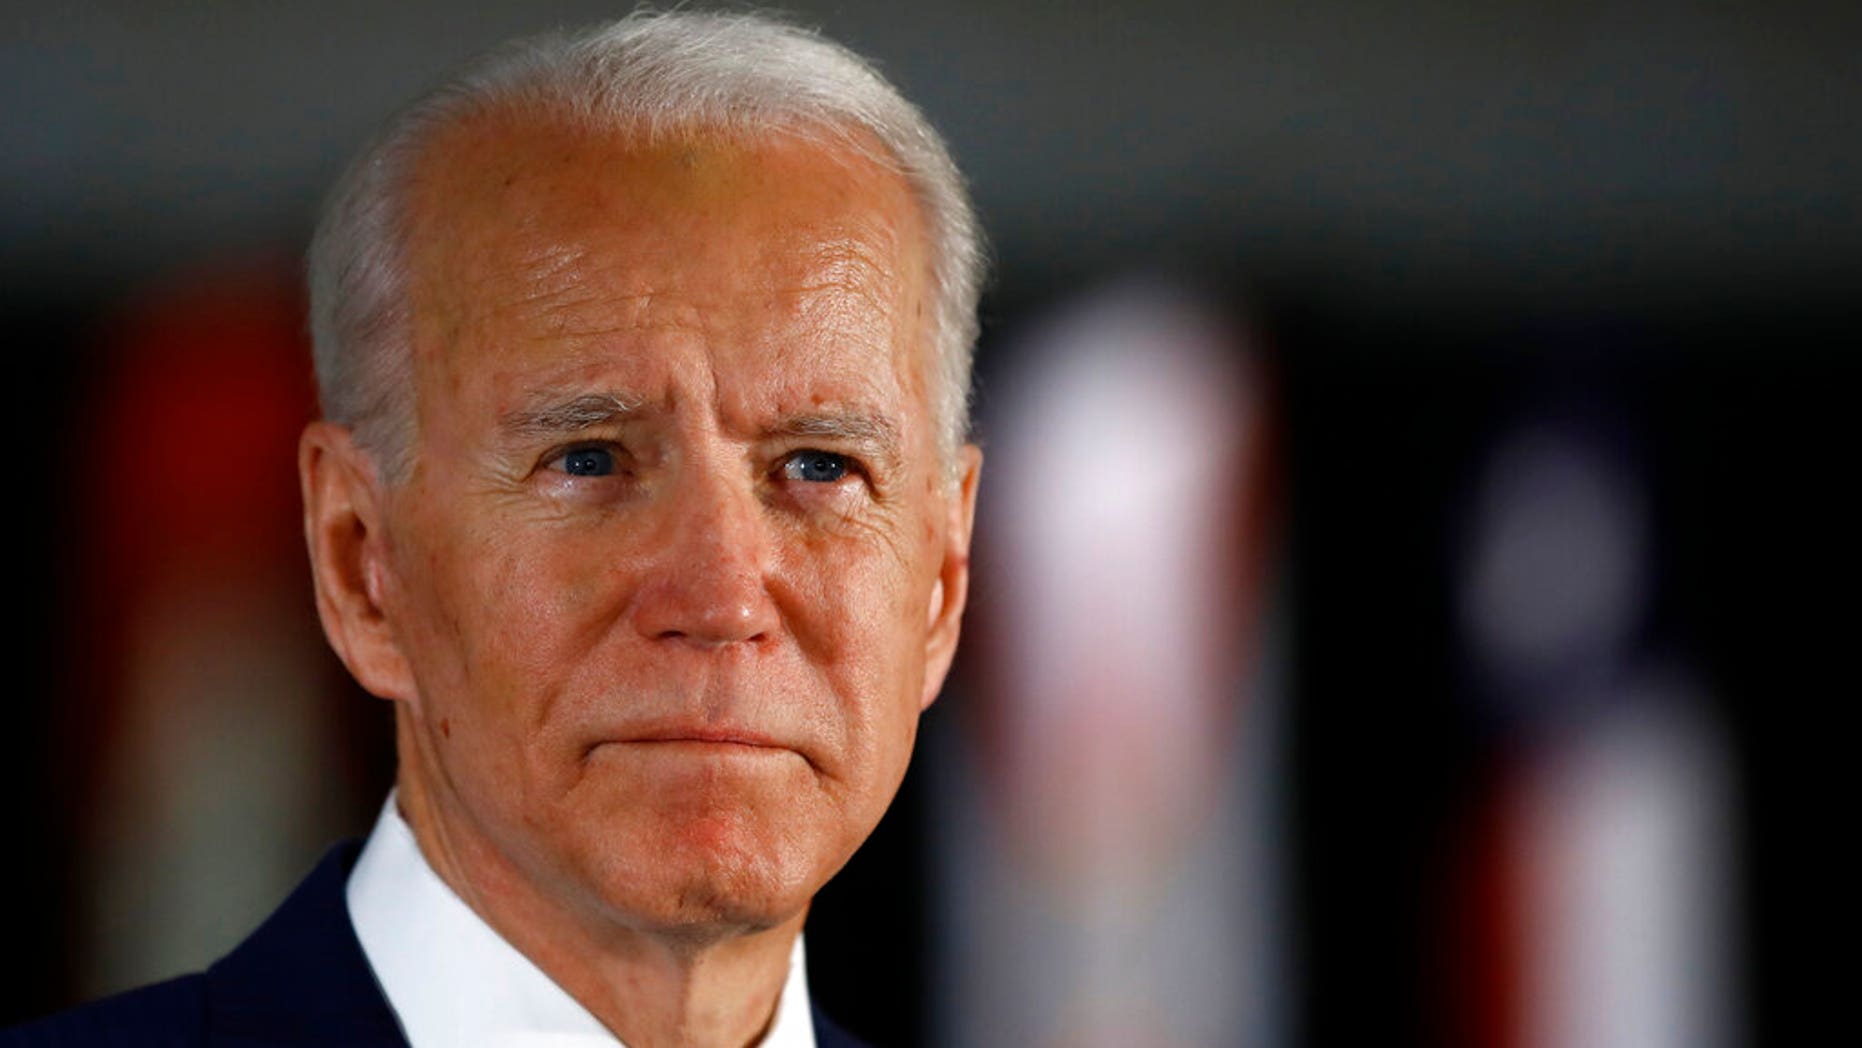 FILE - In this March 10, 2020, file photo Democratic presidential candidate former Vice President Joe Biden speaks to members of the press at the National Constitution Center in Philadelphia. (AP Photo/Matt Rourke, File)